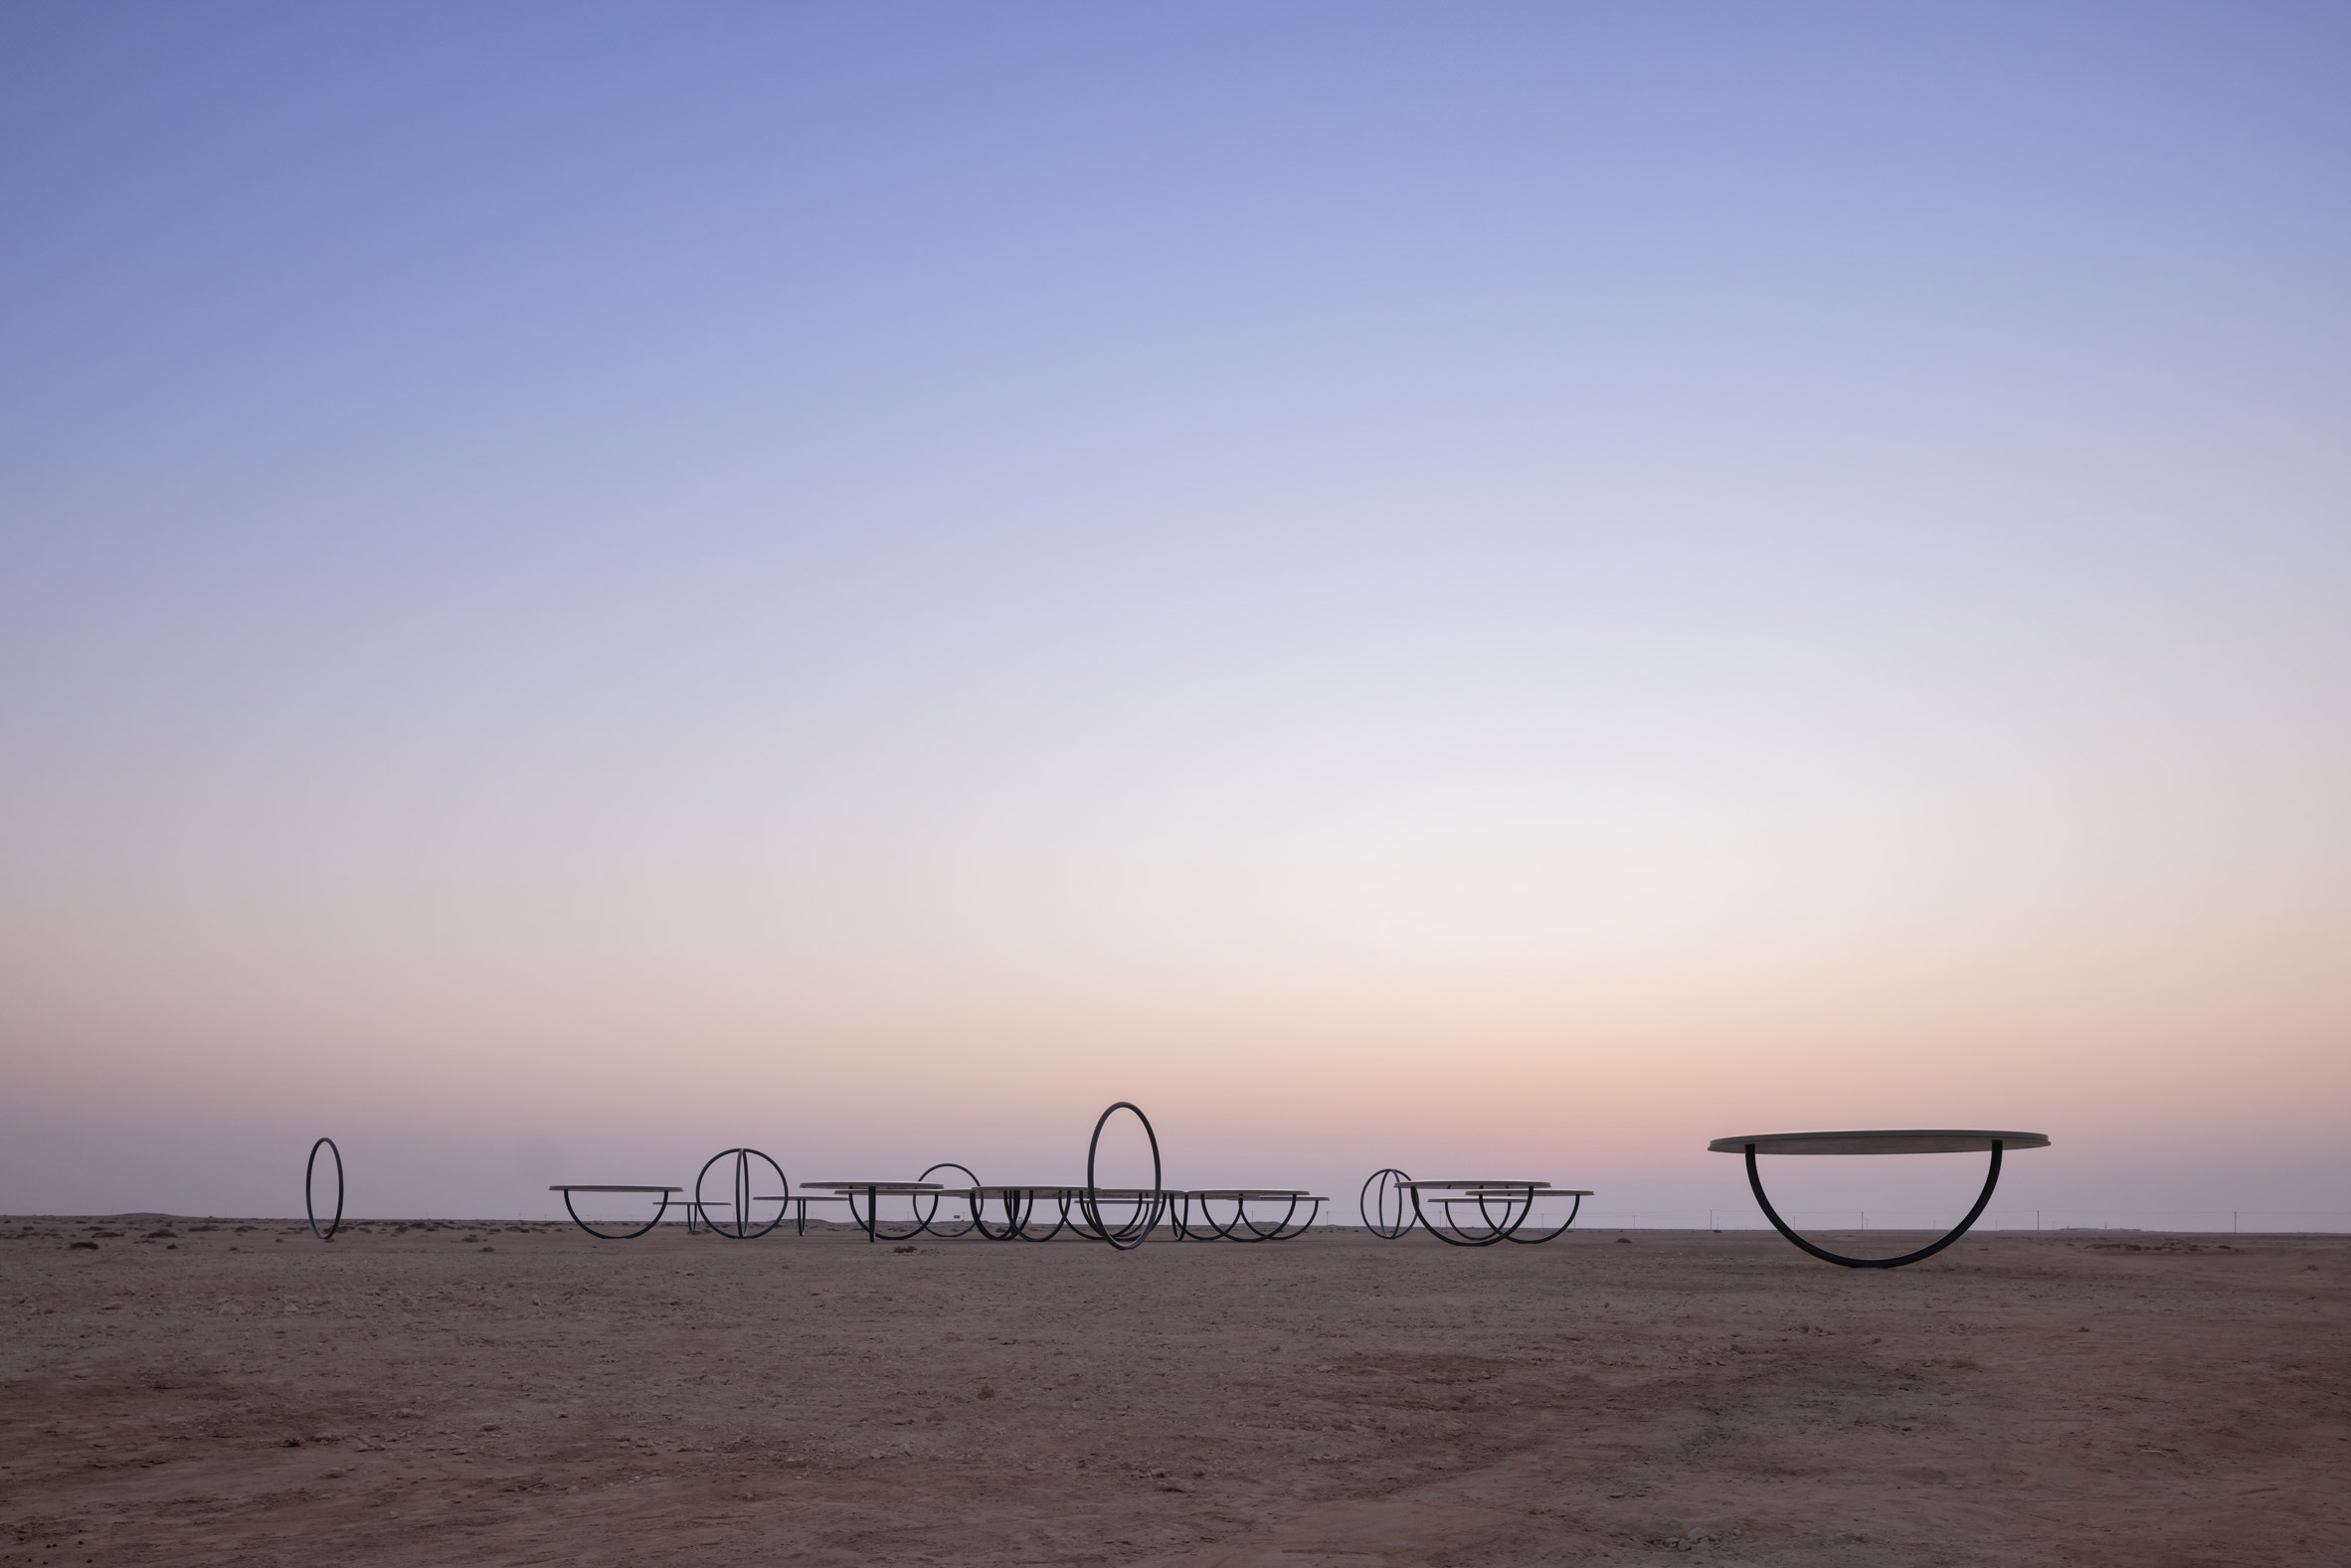 An installation by Olafur Eliasson at sunset